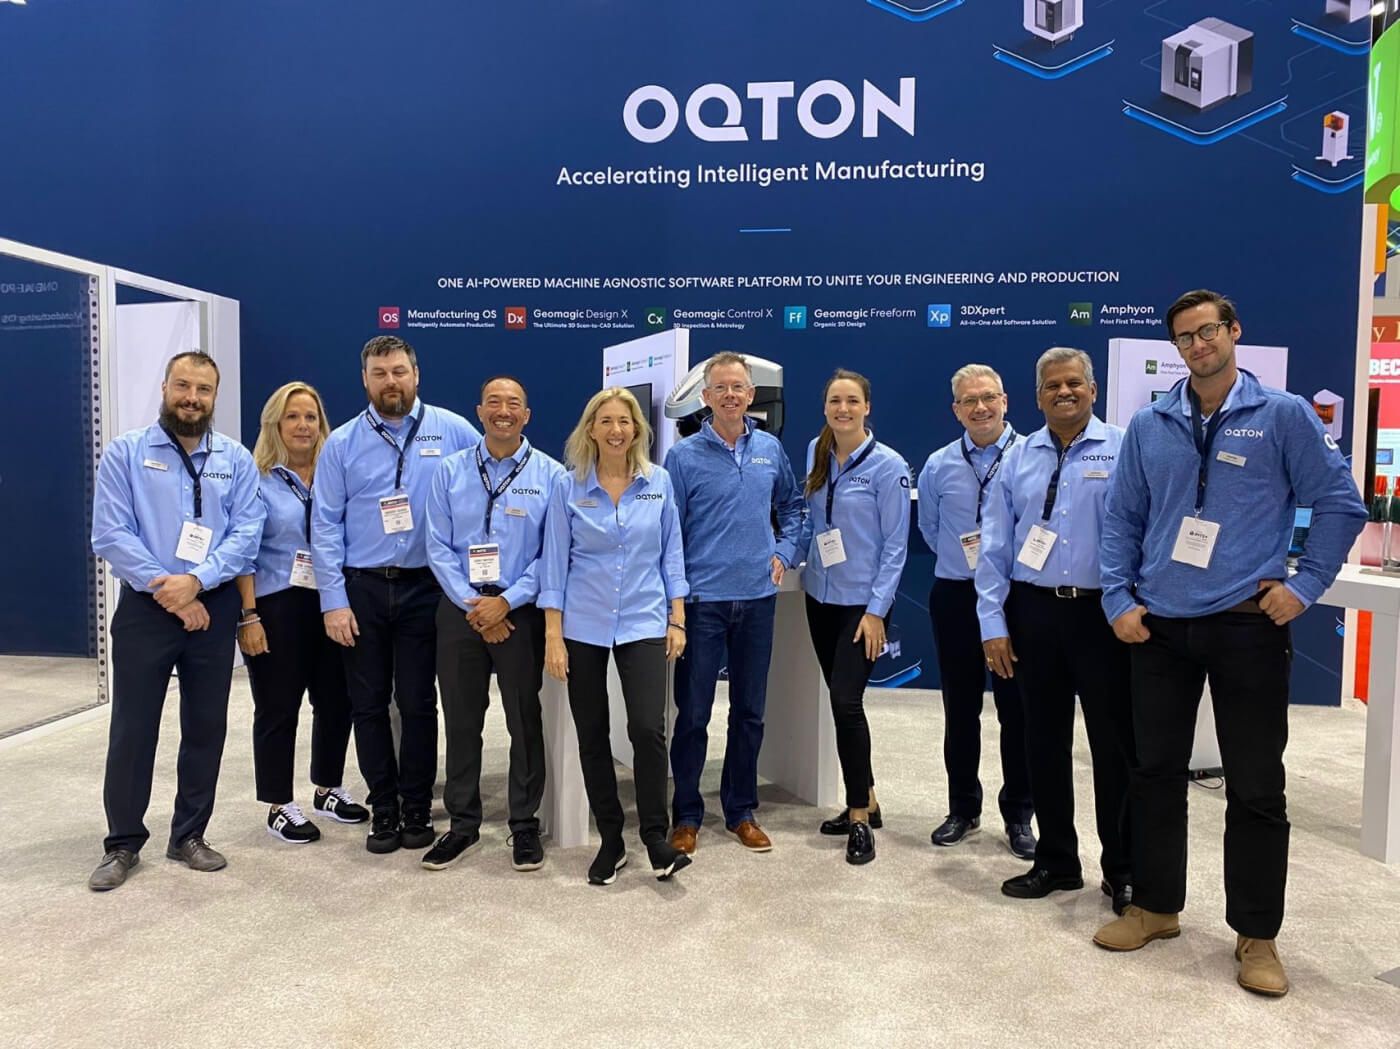 Oqton at IMTS, in the US